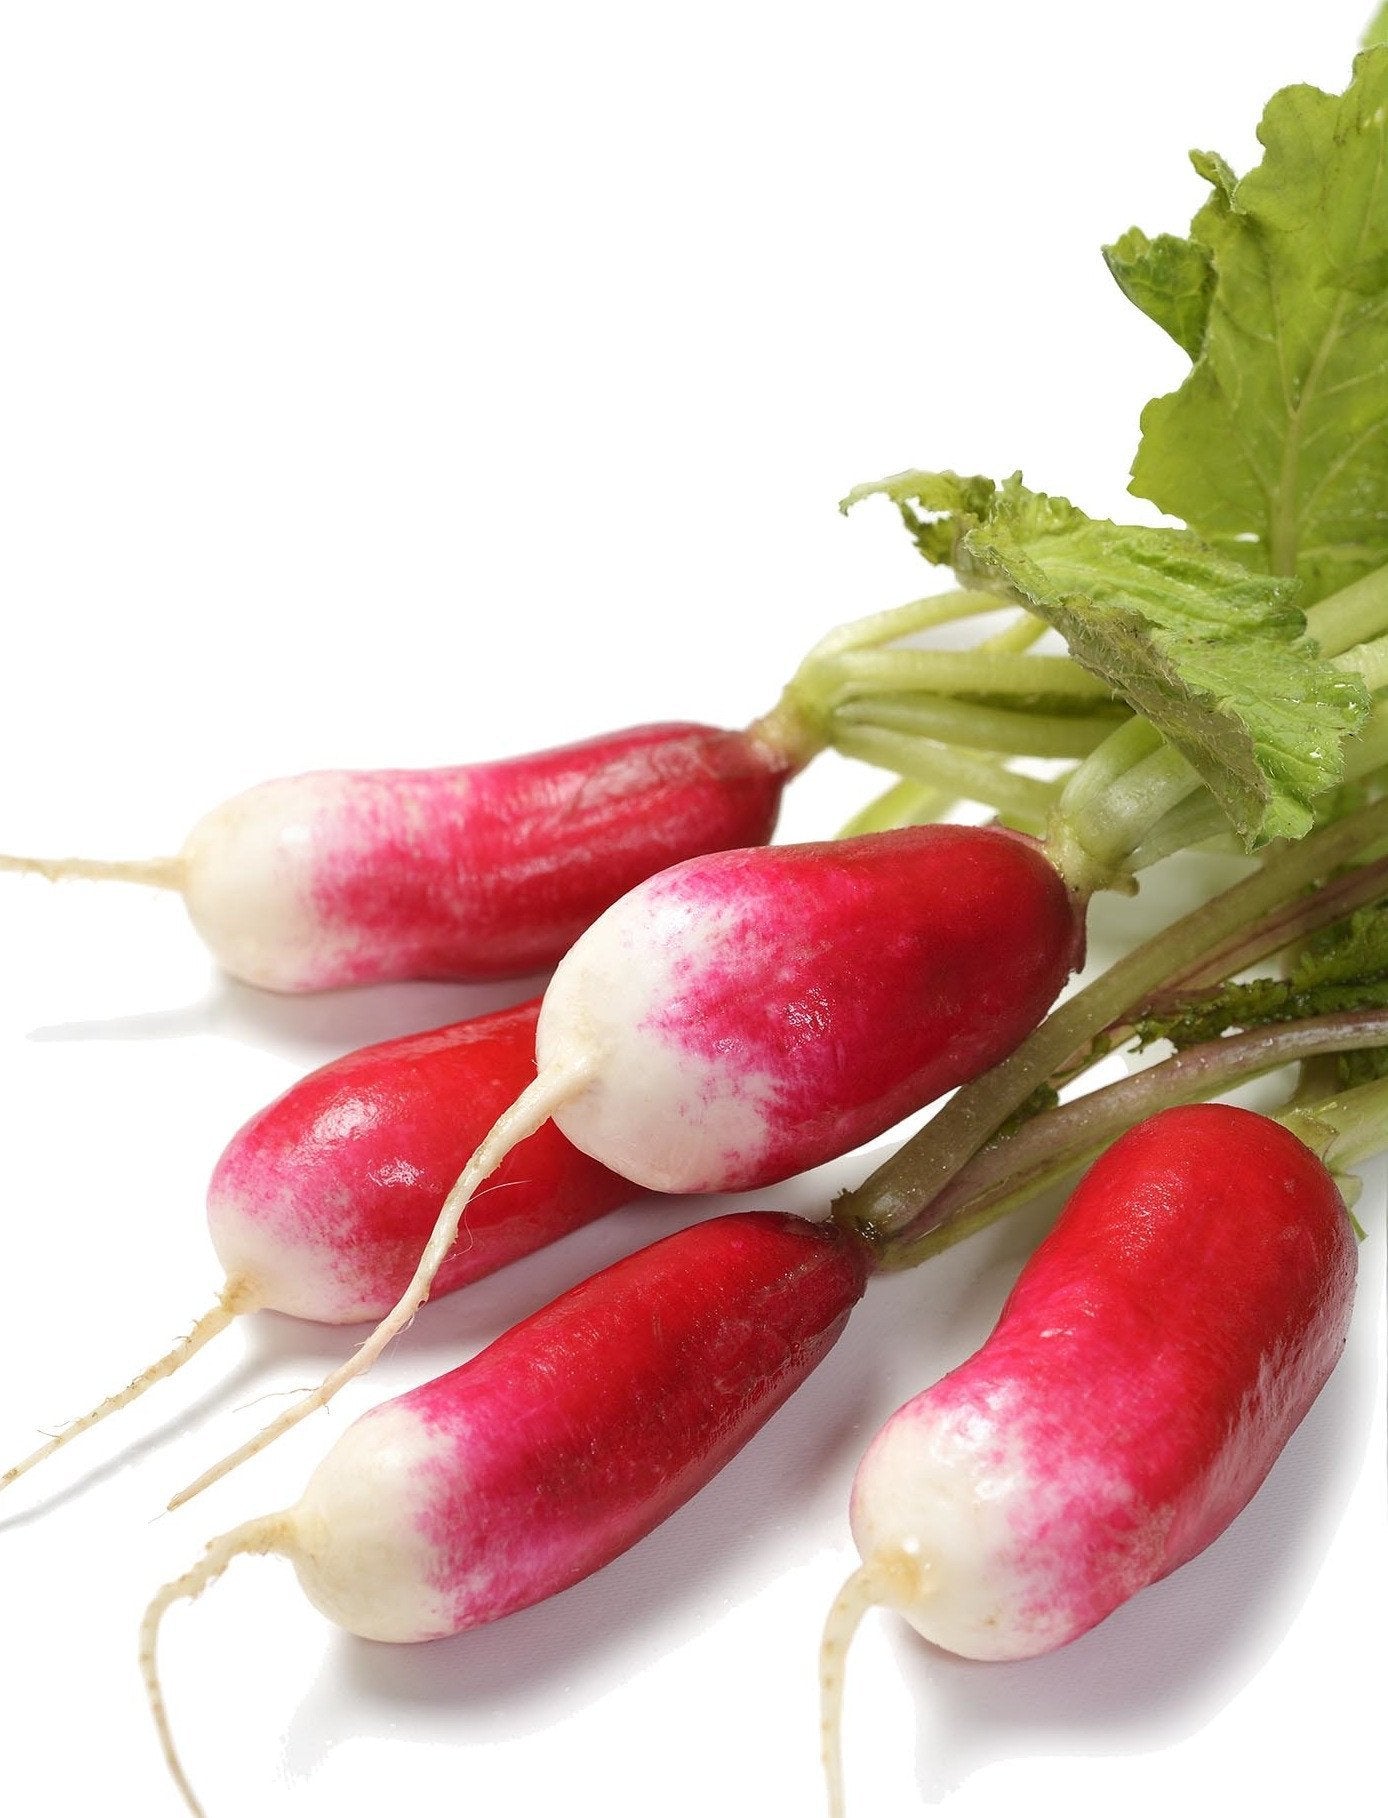 What Are French Breakfast Radishes And What Makes Them Special?